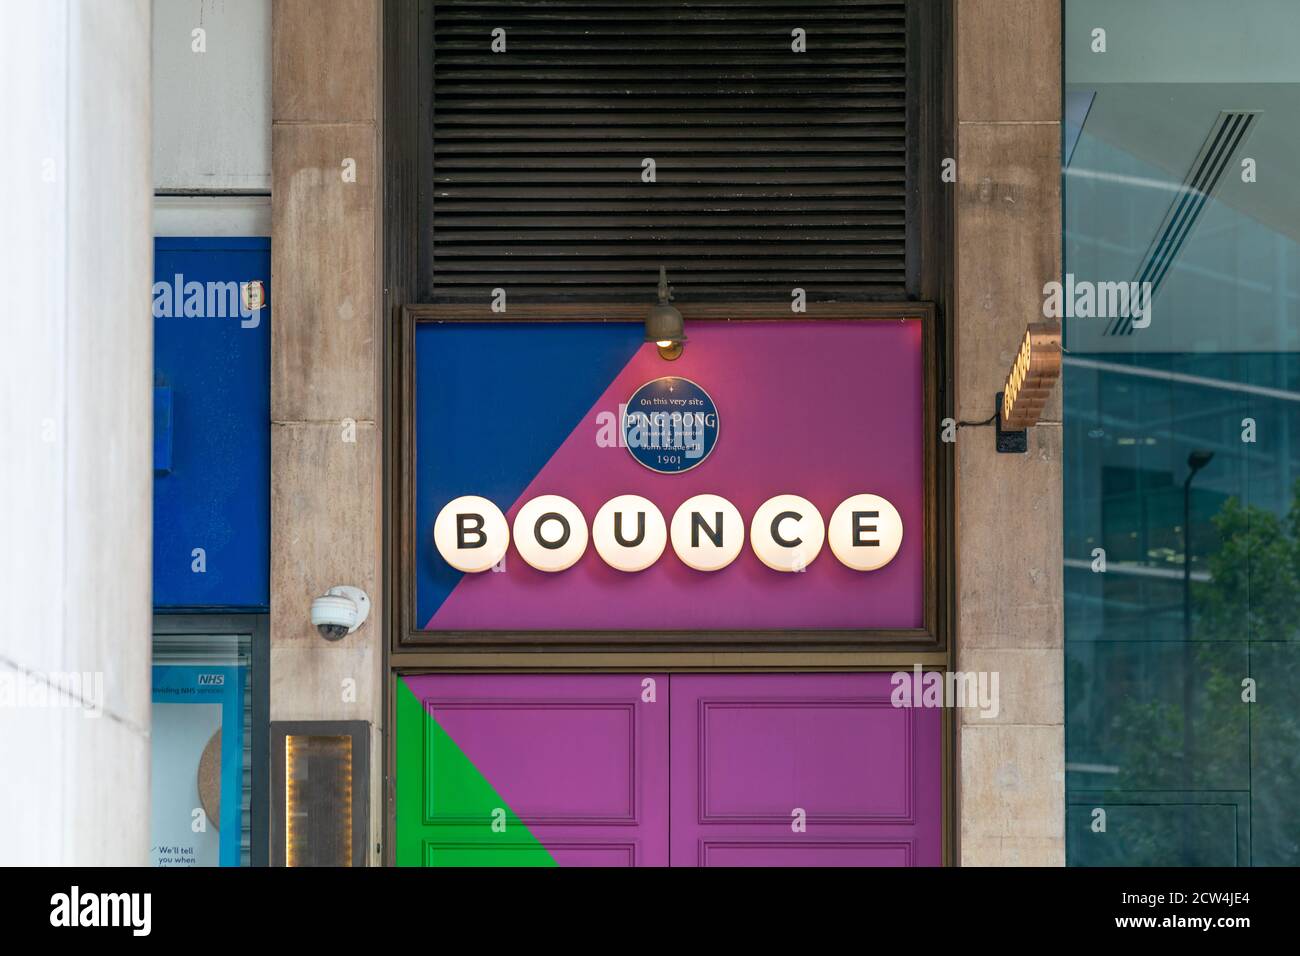 LONDON, ENGLAND - JULY 24, 2020:  Bounce 'The Home of Ping Pong'  Club at Farringdon, London closed during the COVID-19 coronavirus pandemic - 136 Stock Photo